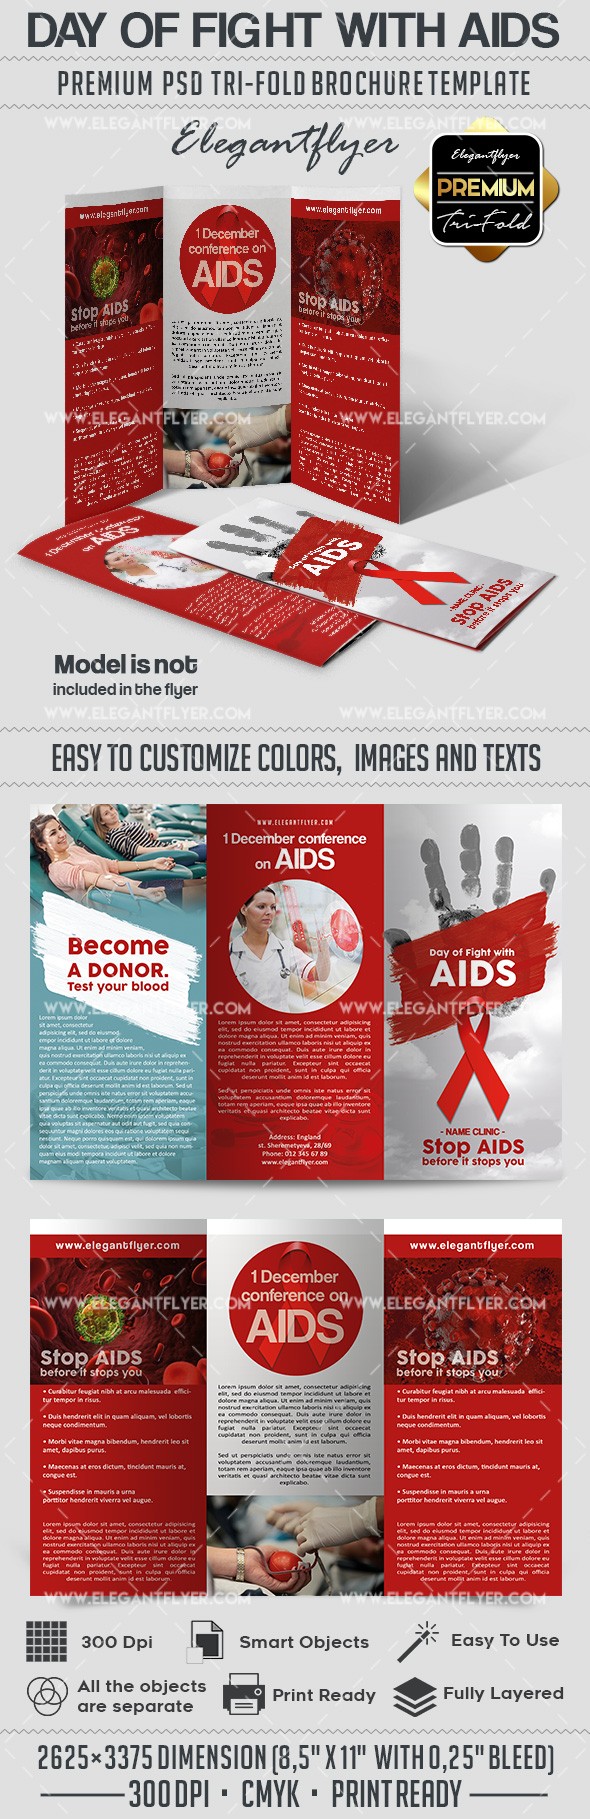 Day of Fight with AIDS by ElegantFlyer